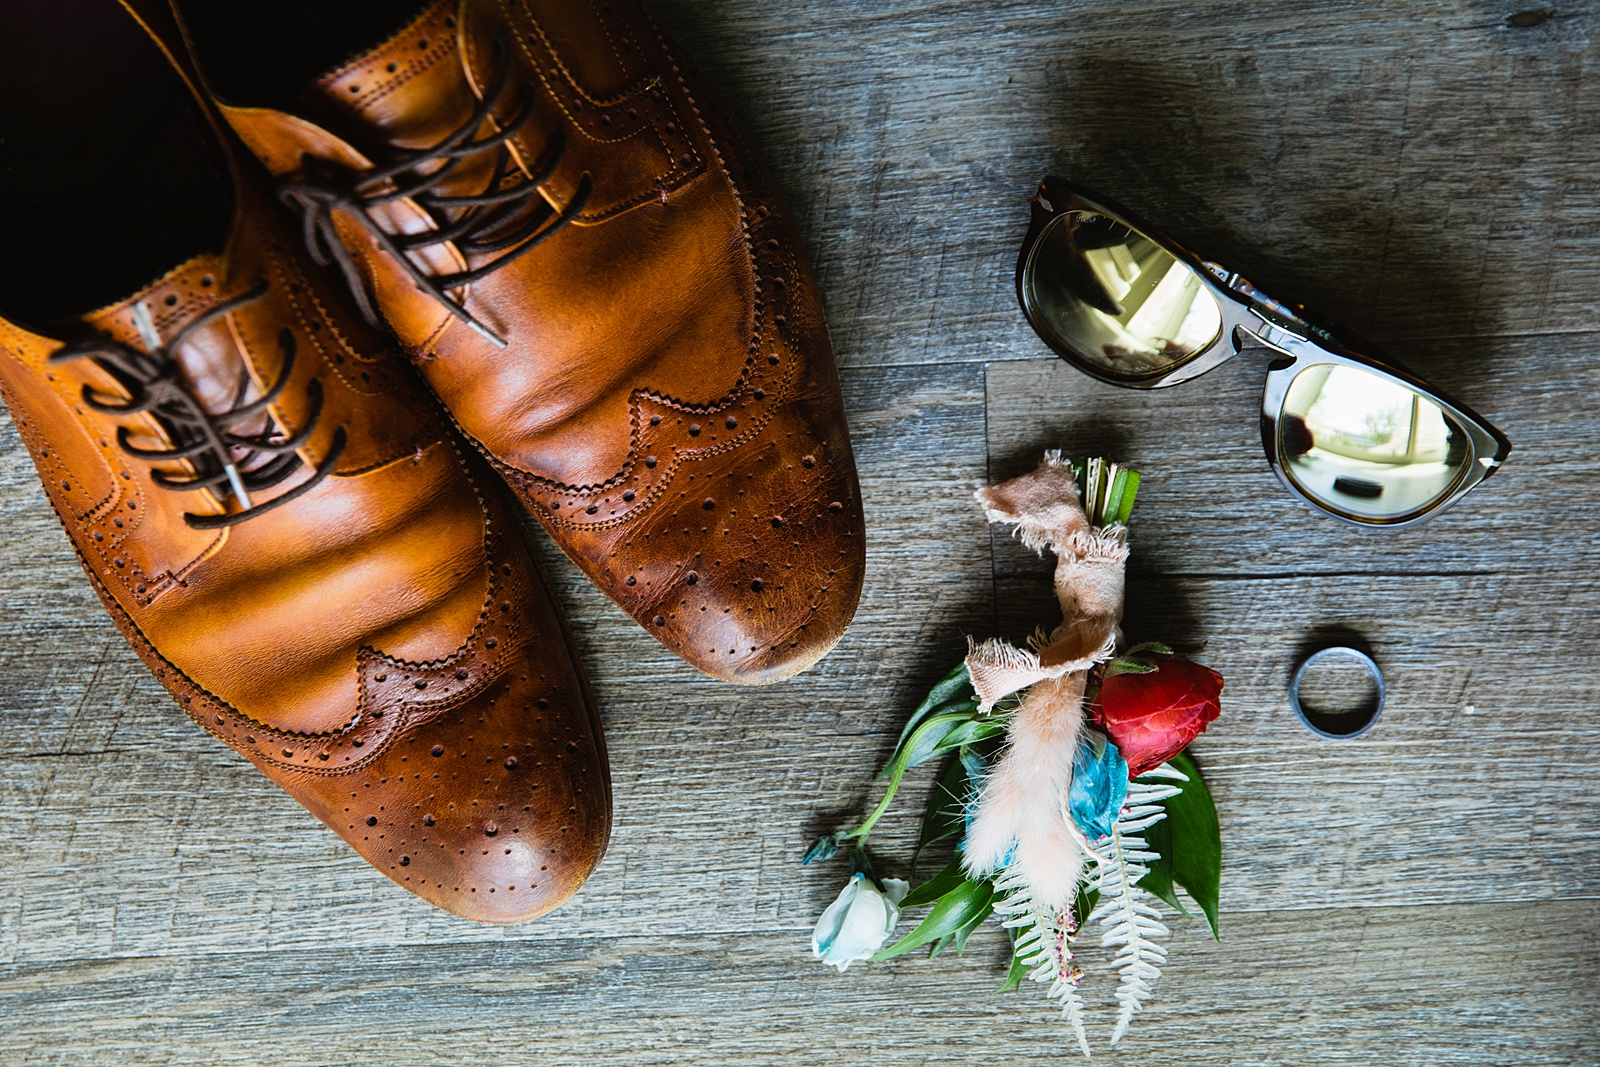 Groom's wedding day details of shoes, sunglasses, boutonniere and wedding ring by PMA Photography.